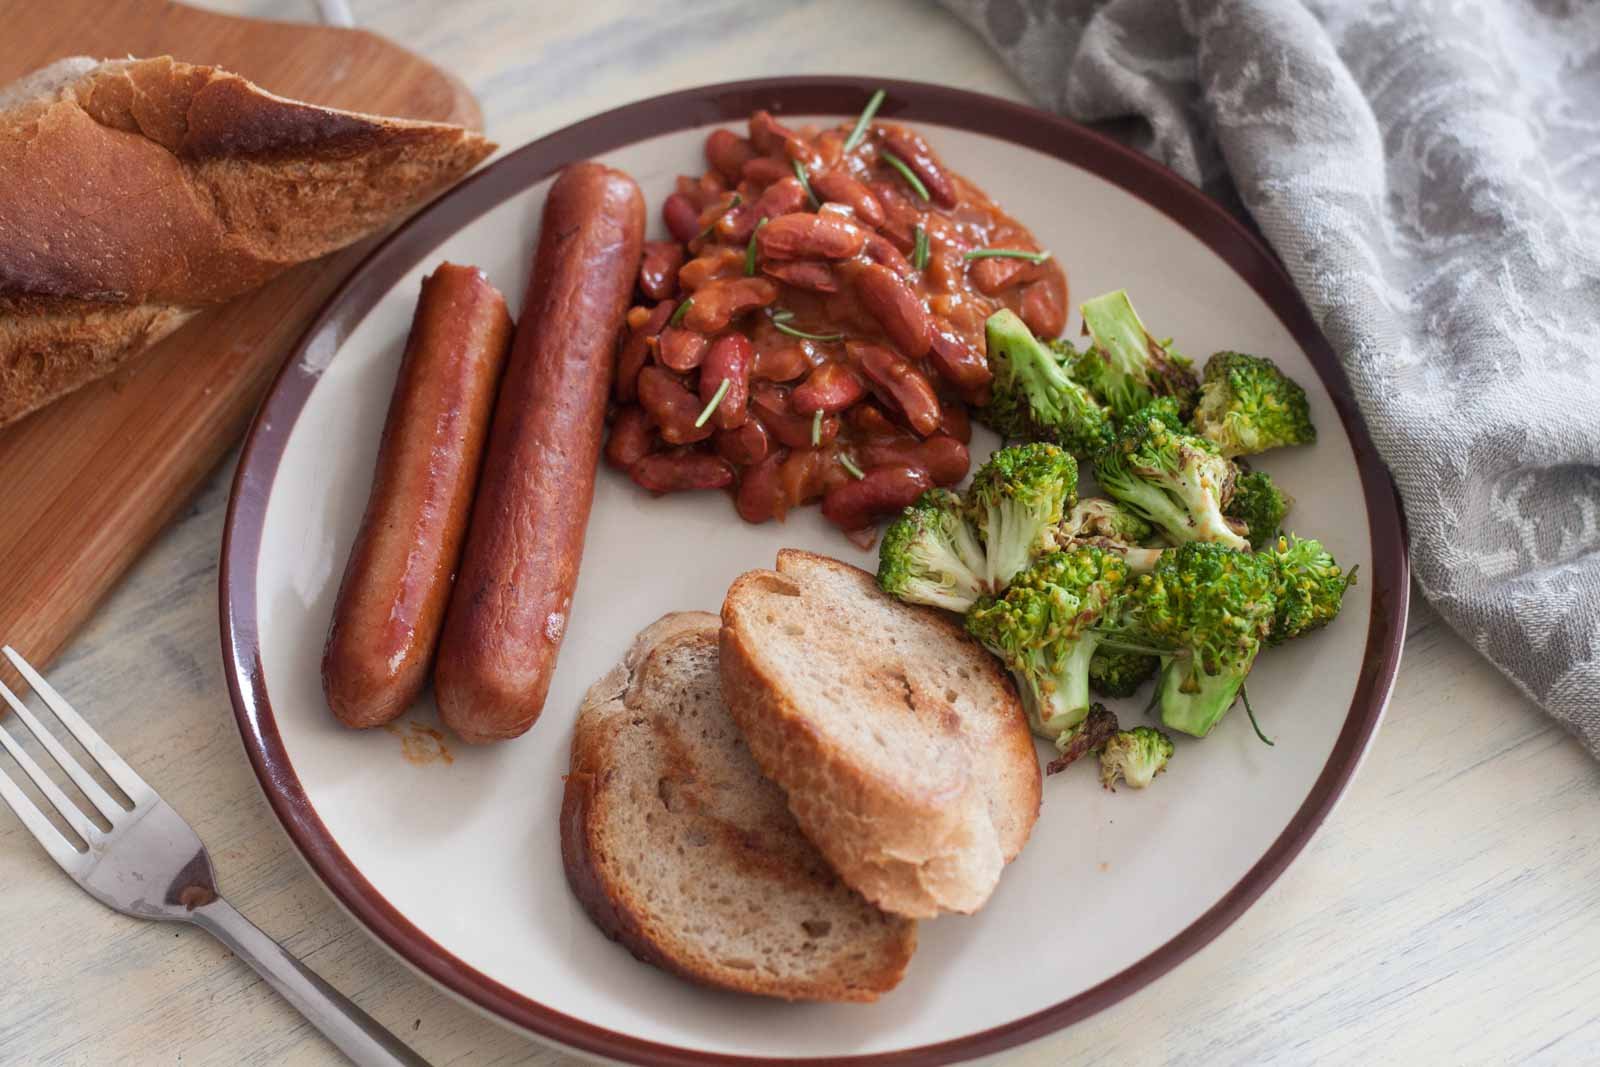 Chicken Sausages, Baked Beans and Stir Fried Broccoli Recipe by Archana’s Kitchen – NewsEverything Food